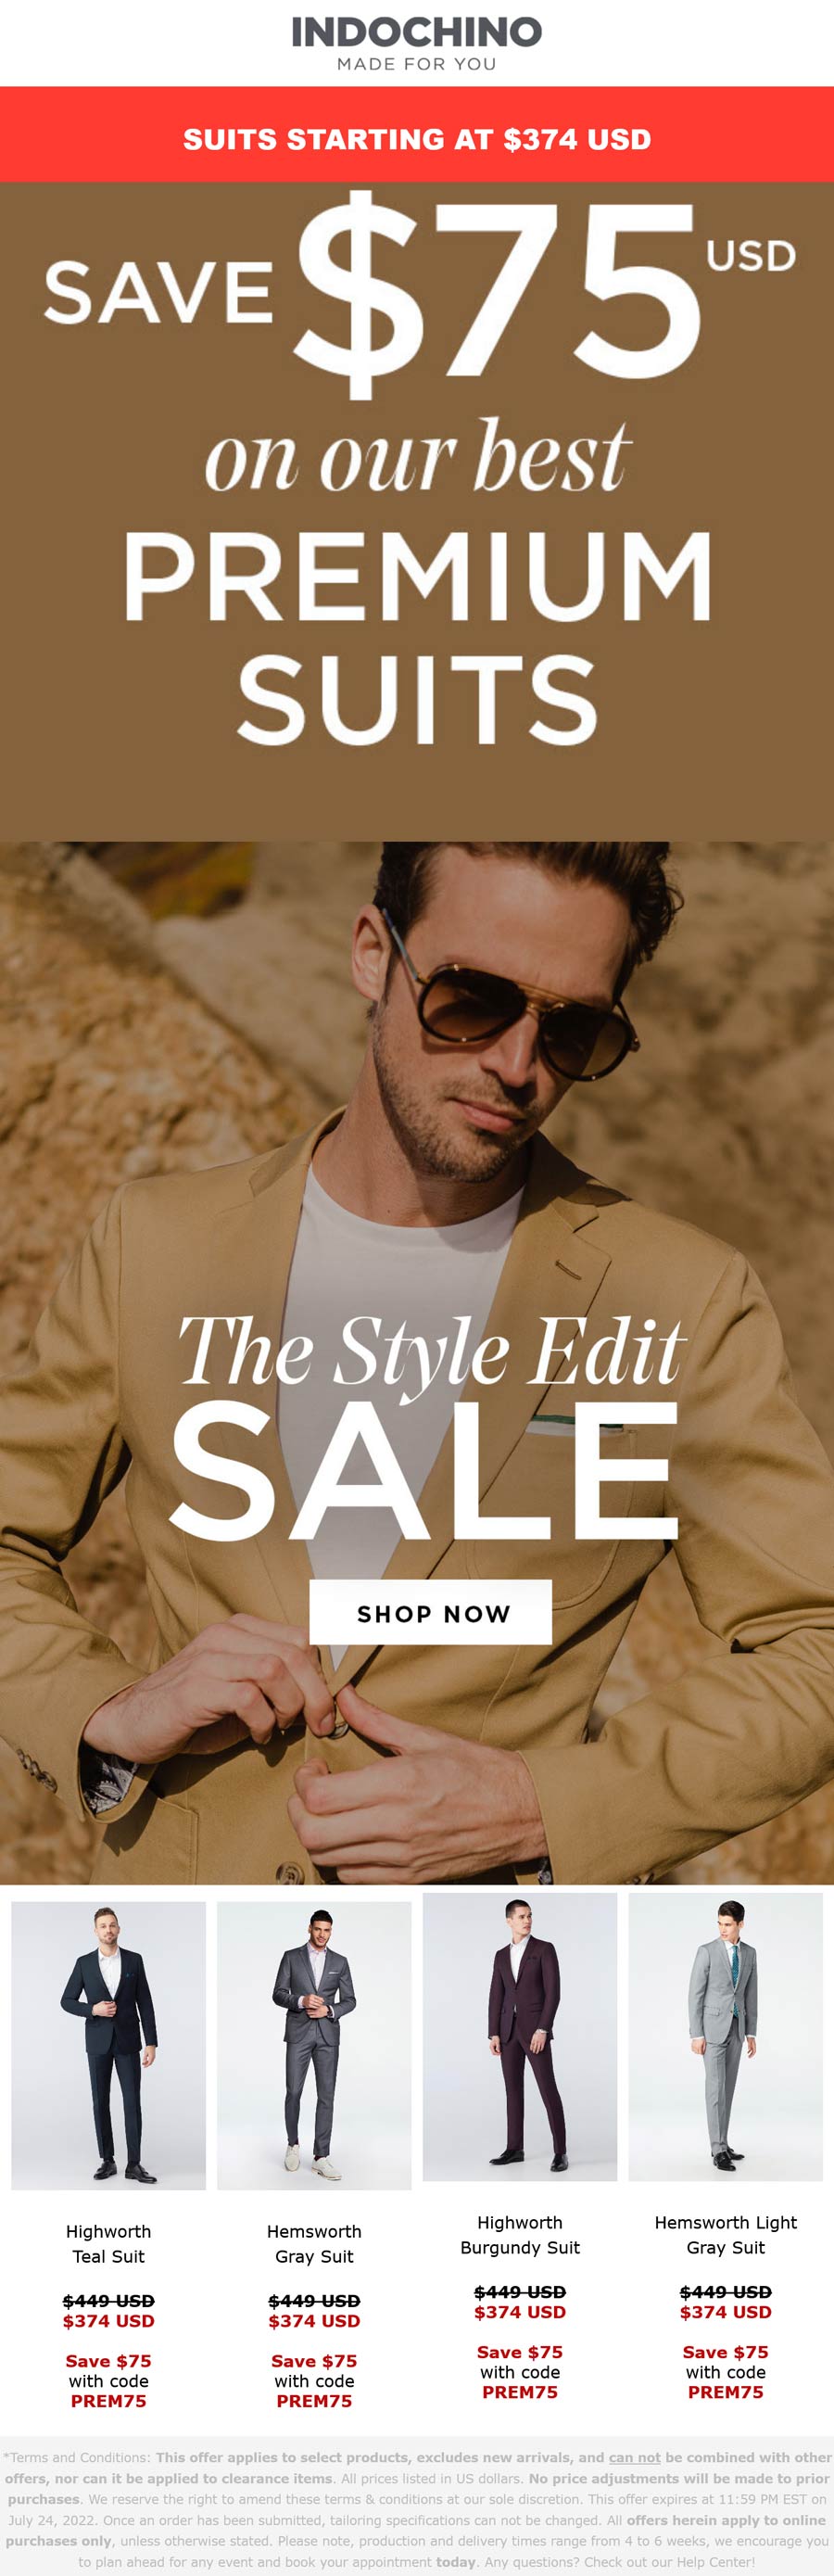 Indochino stores Coupon  $75 off premium suits at Indochino via promo code PREM75 #indochino 